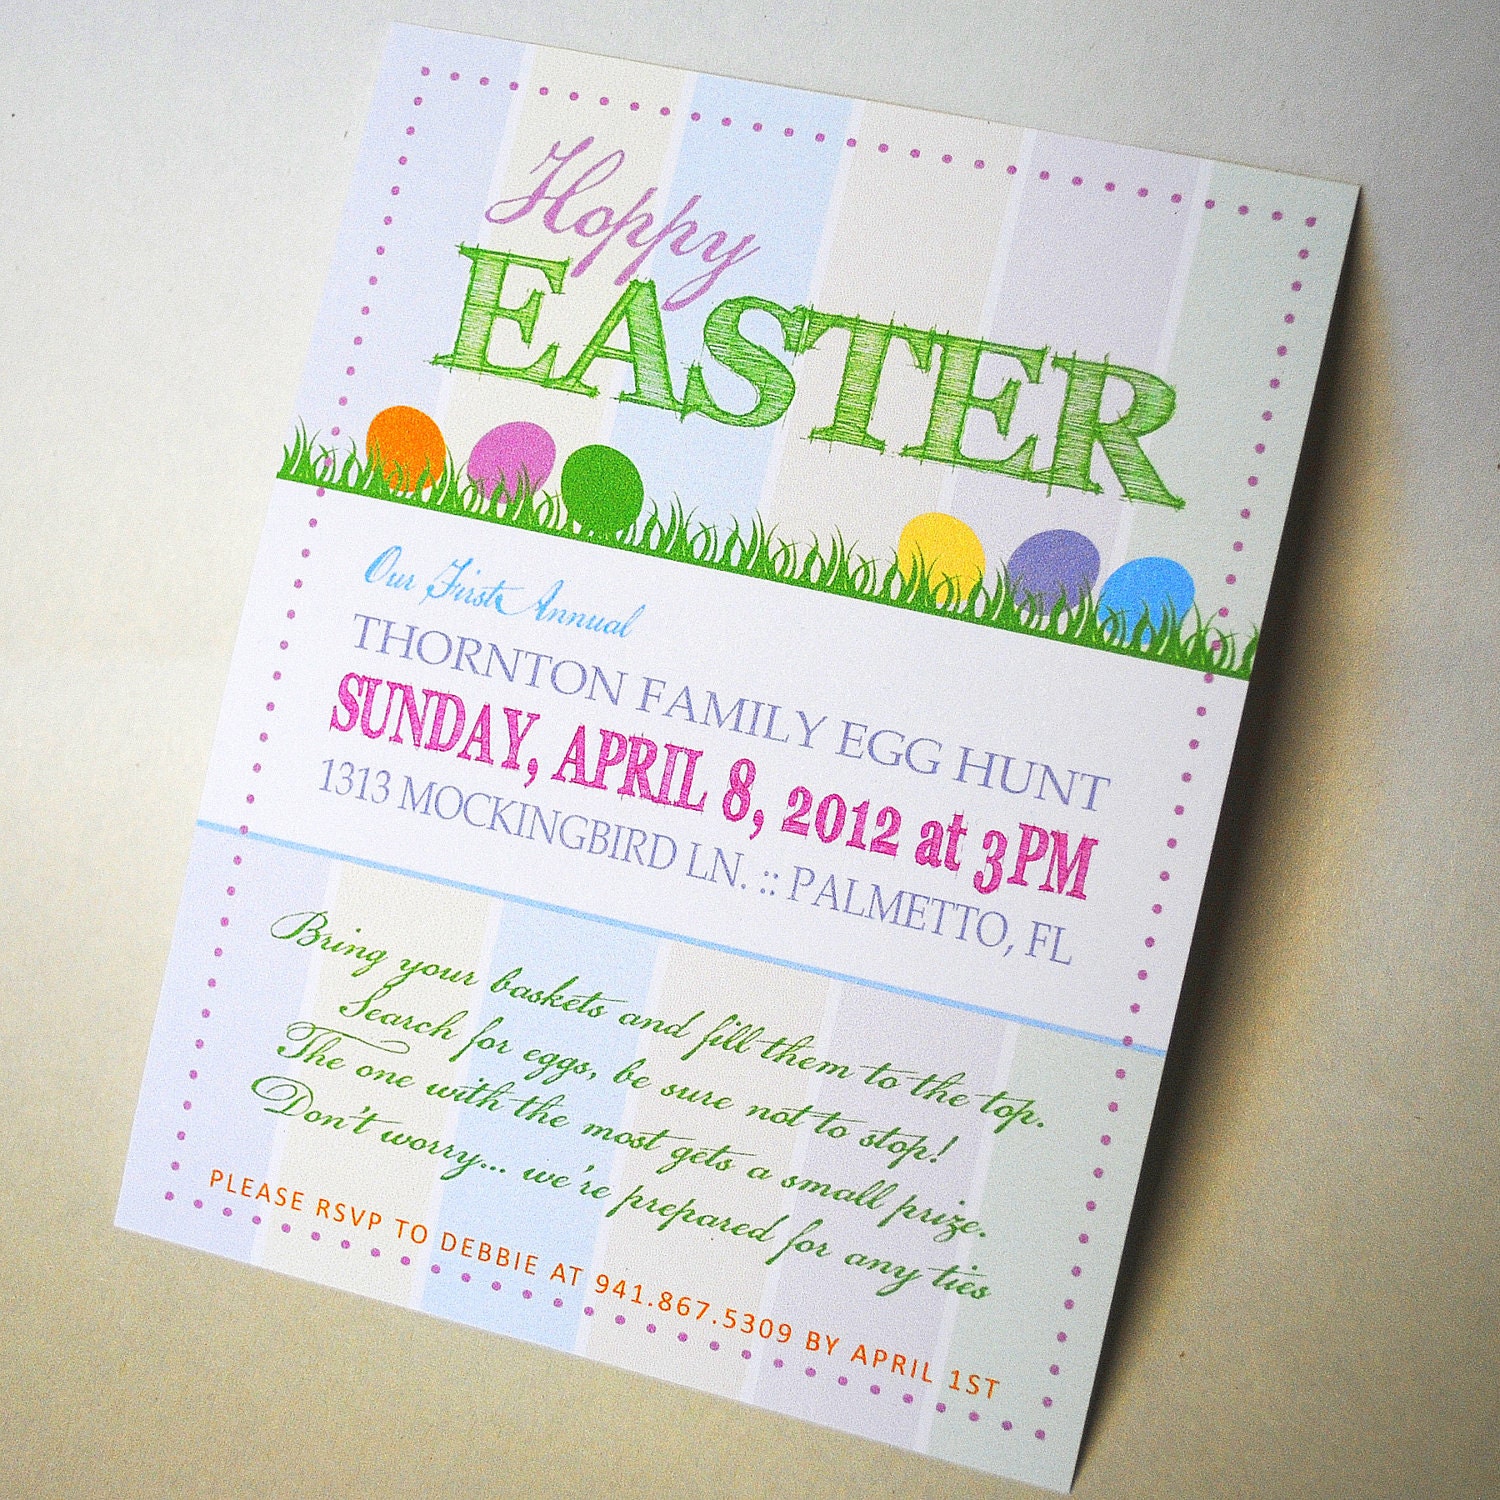 Hoppy Easter, Egg Hunt Invitation with pastel background and colorful eggs - Custom, Personalized and Printable - LisaKaydesigns